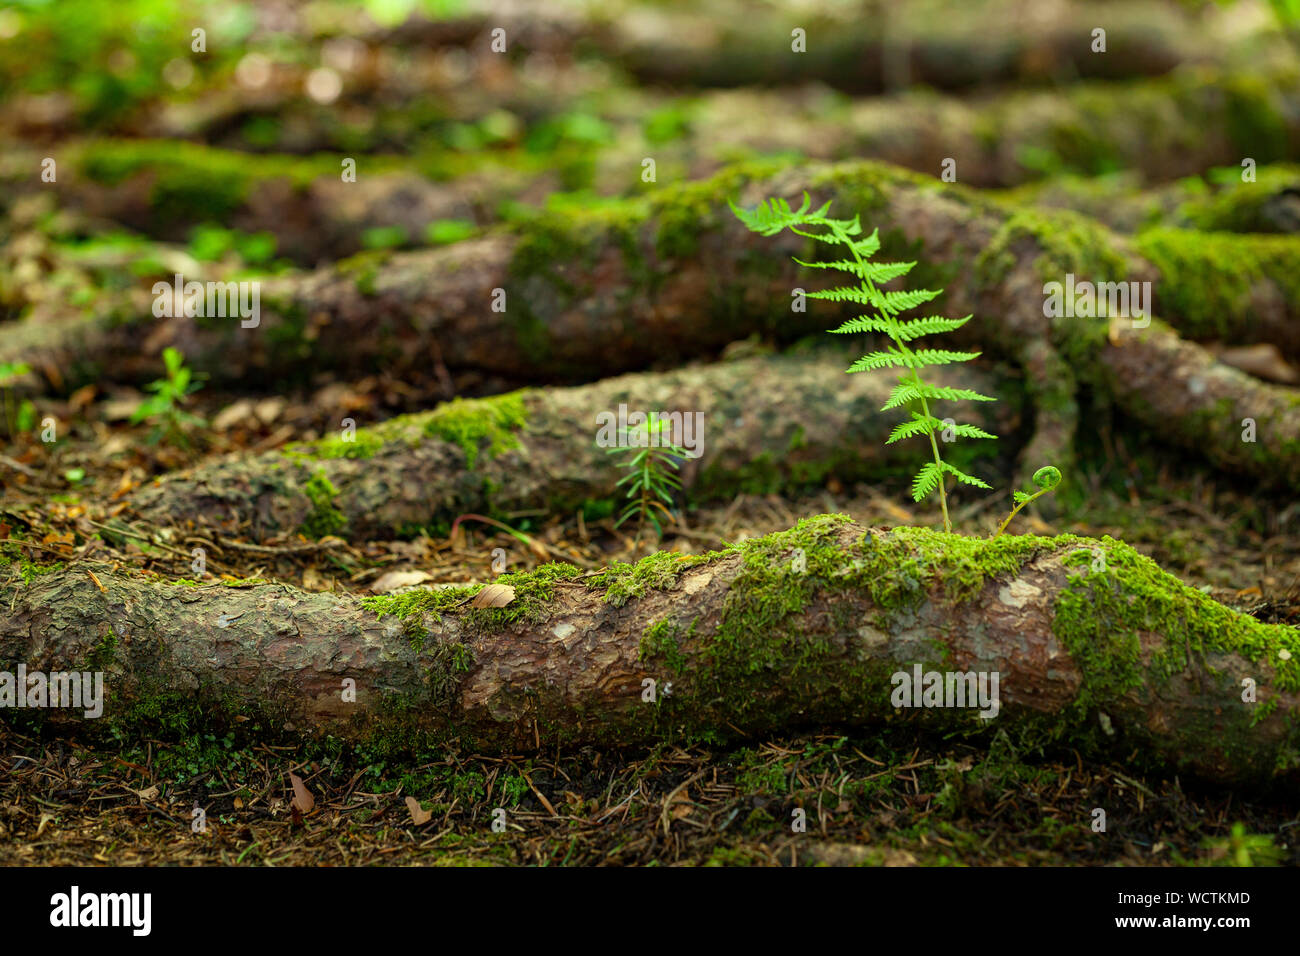 young lush sprouth, named Thelypteris  palustris, growing up on a mossy truck on a forest ground Stock Photo